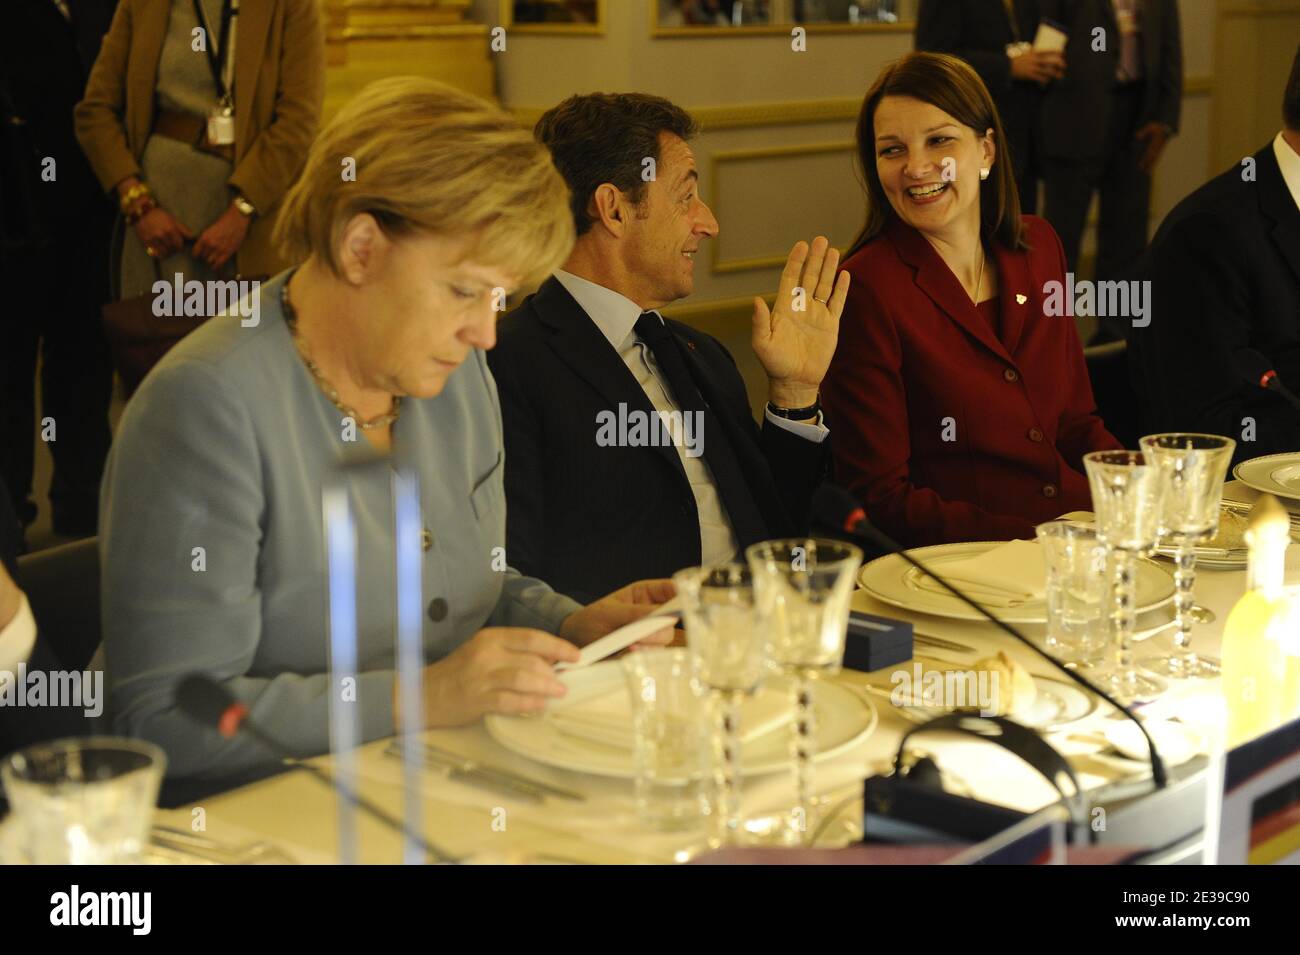 French President Nicolas Sarkozy (C), German Chancellor Angela Merkel (L) and Finland's Prime Minister Mari Kiviniemi (R) are picture during the ASEM 8 summit in Brussels, Belgium on October 4, 2010. European and Asian leaders will seek common ground on ways to fix and regulate the global financial market but will likely be bogged down by such issues as market restrictions and trade surpluses during three days of summits. Photo by Elodie Gregoire/ABACAPRESS.COM Stock Photo